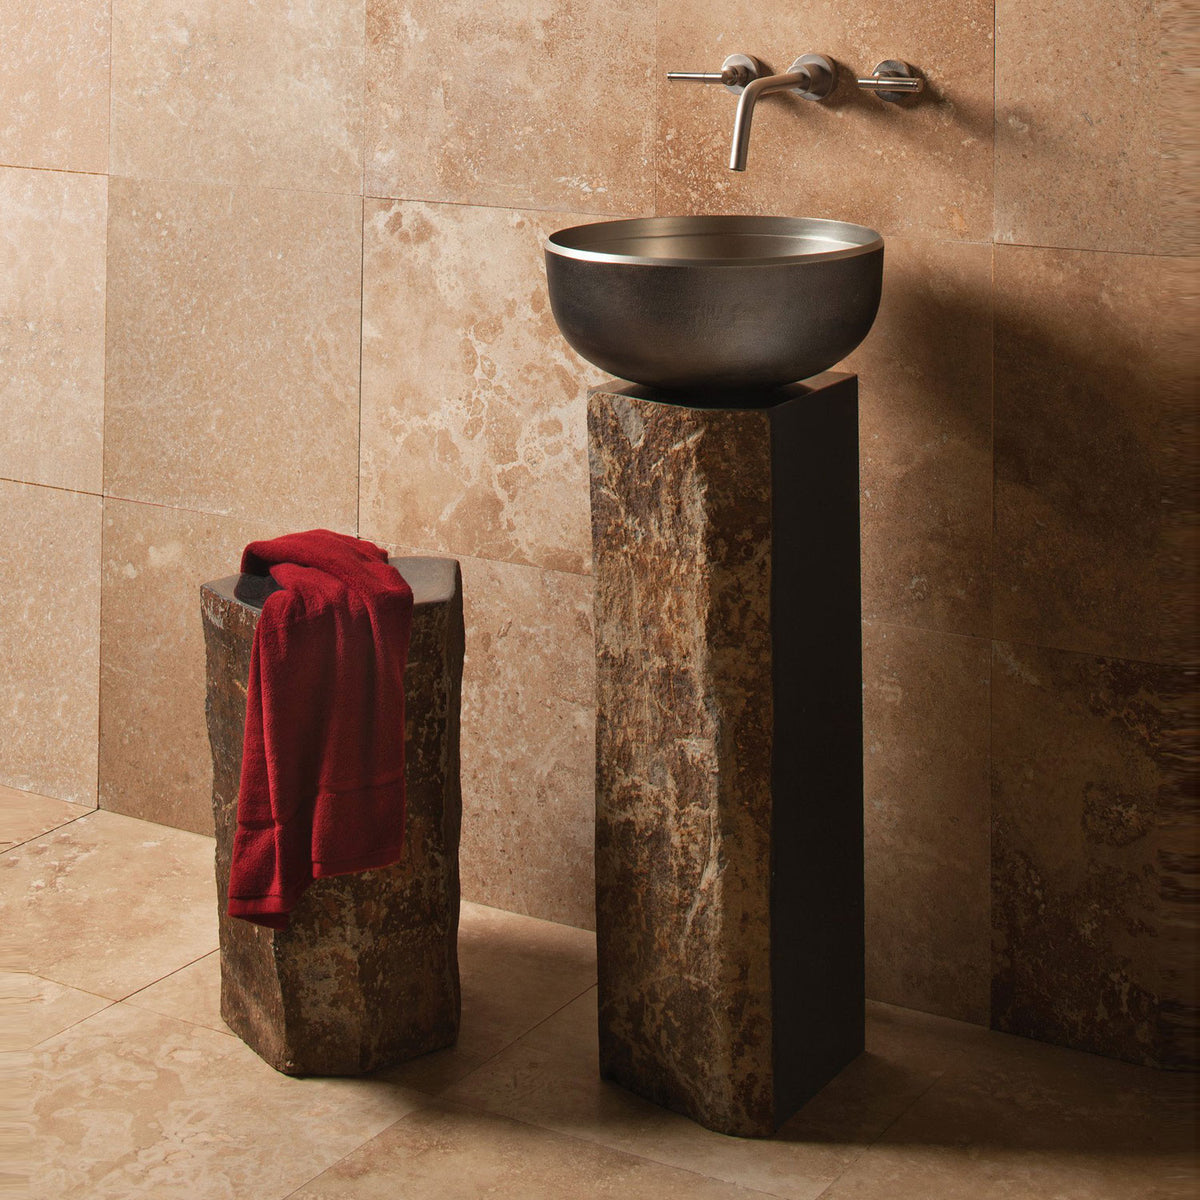 Stone Forest Basalt Pedestal cut from a solid column of natural basalt.  Each piece features polished sides with contrasting natural textures paired with a white bronze Ore Vessel sink. image 1 of 3